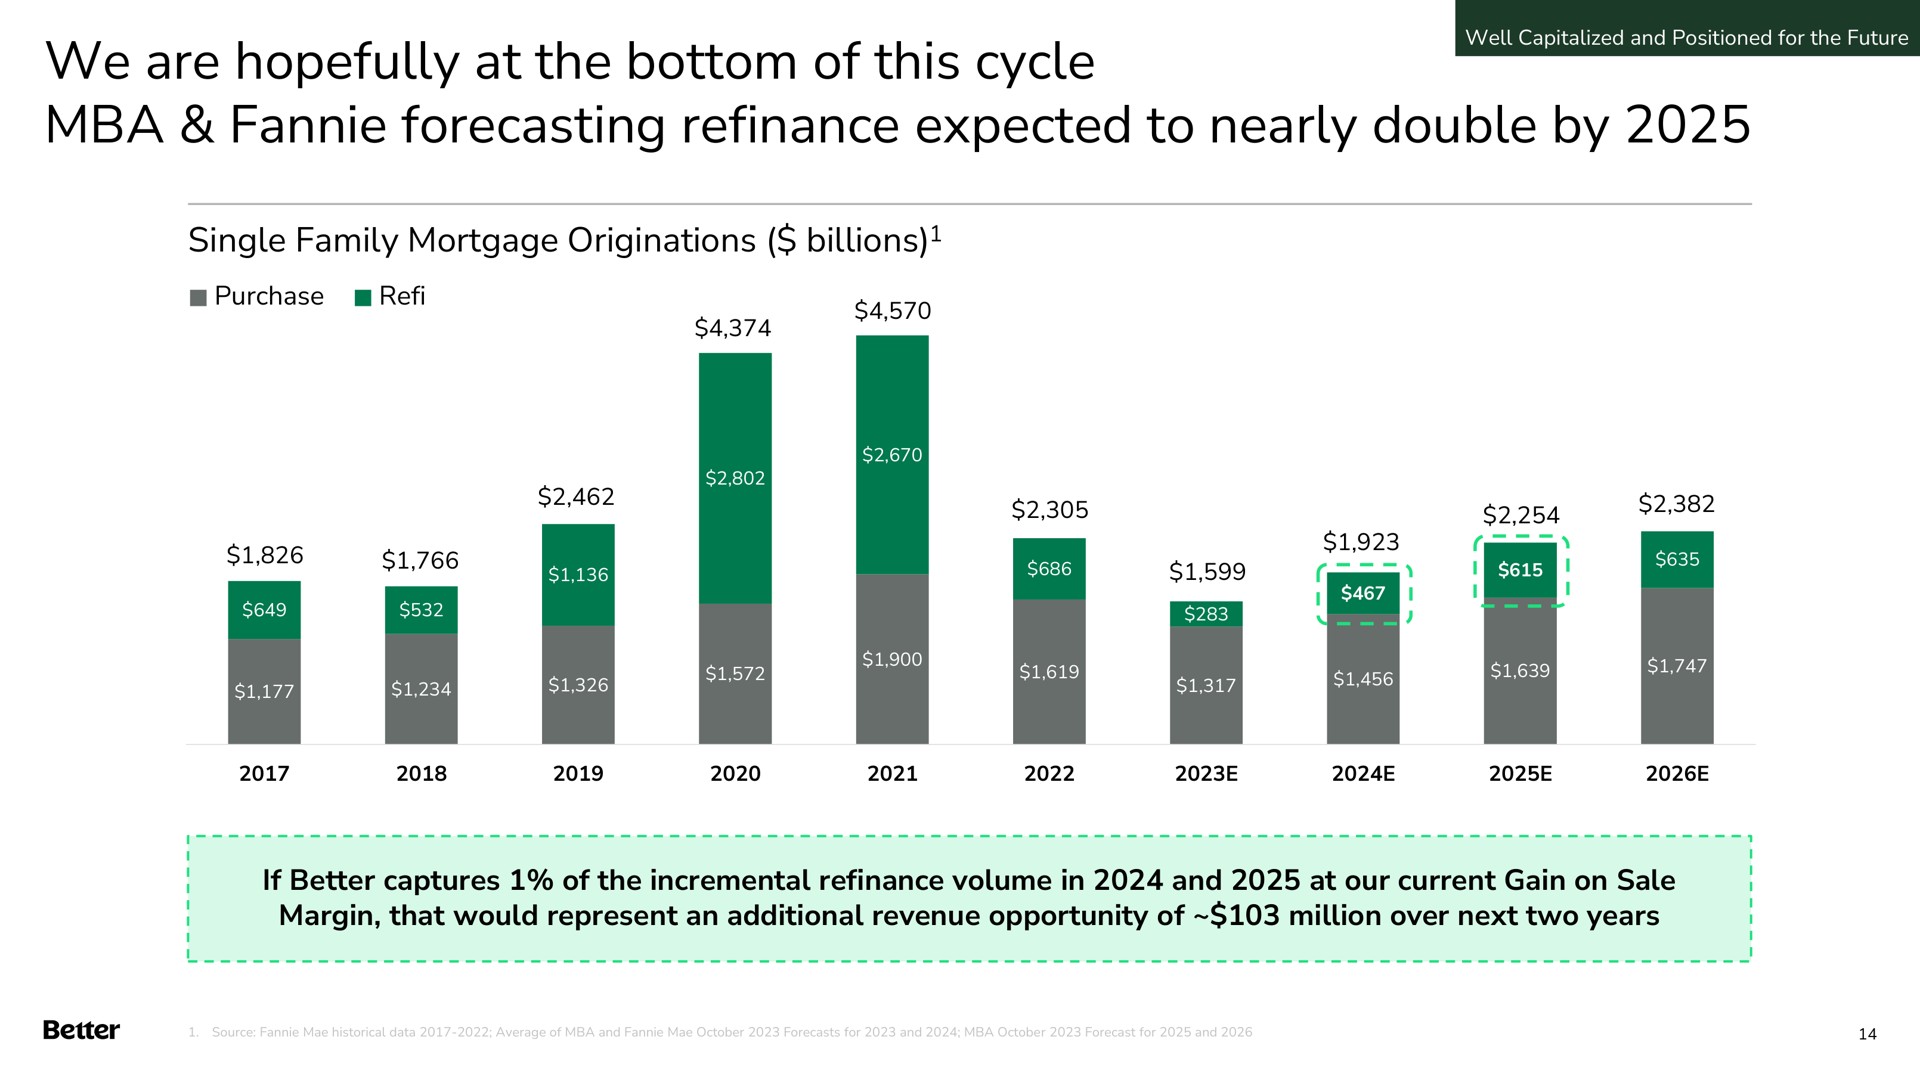 we are hopefully at the bottom of this cycle forecasting refinance expected to nearly double by single family mortgage originations billions sas outs tie see cha if better captures incremental volume in and our current gain on sale margin that would represent an additional revenue opportunity million over next two years | Better